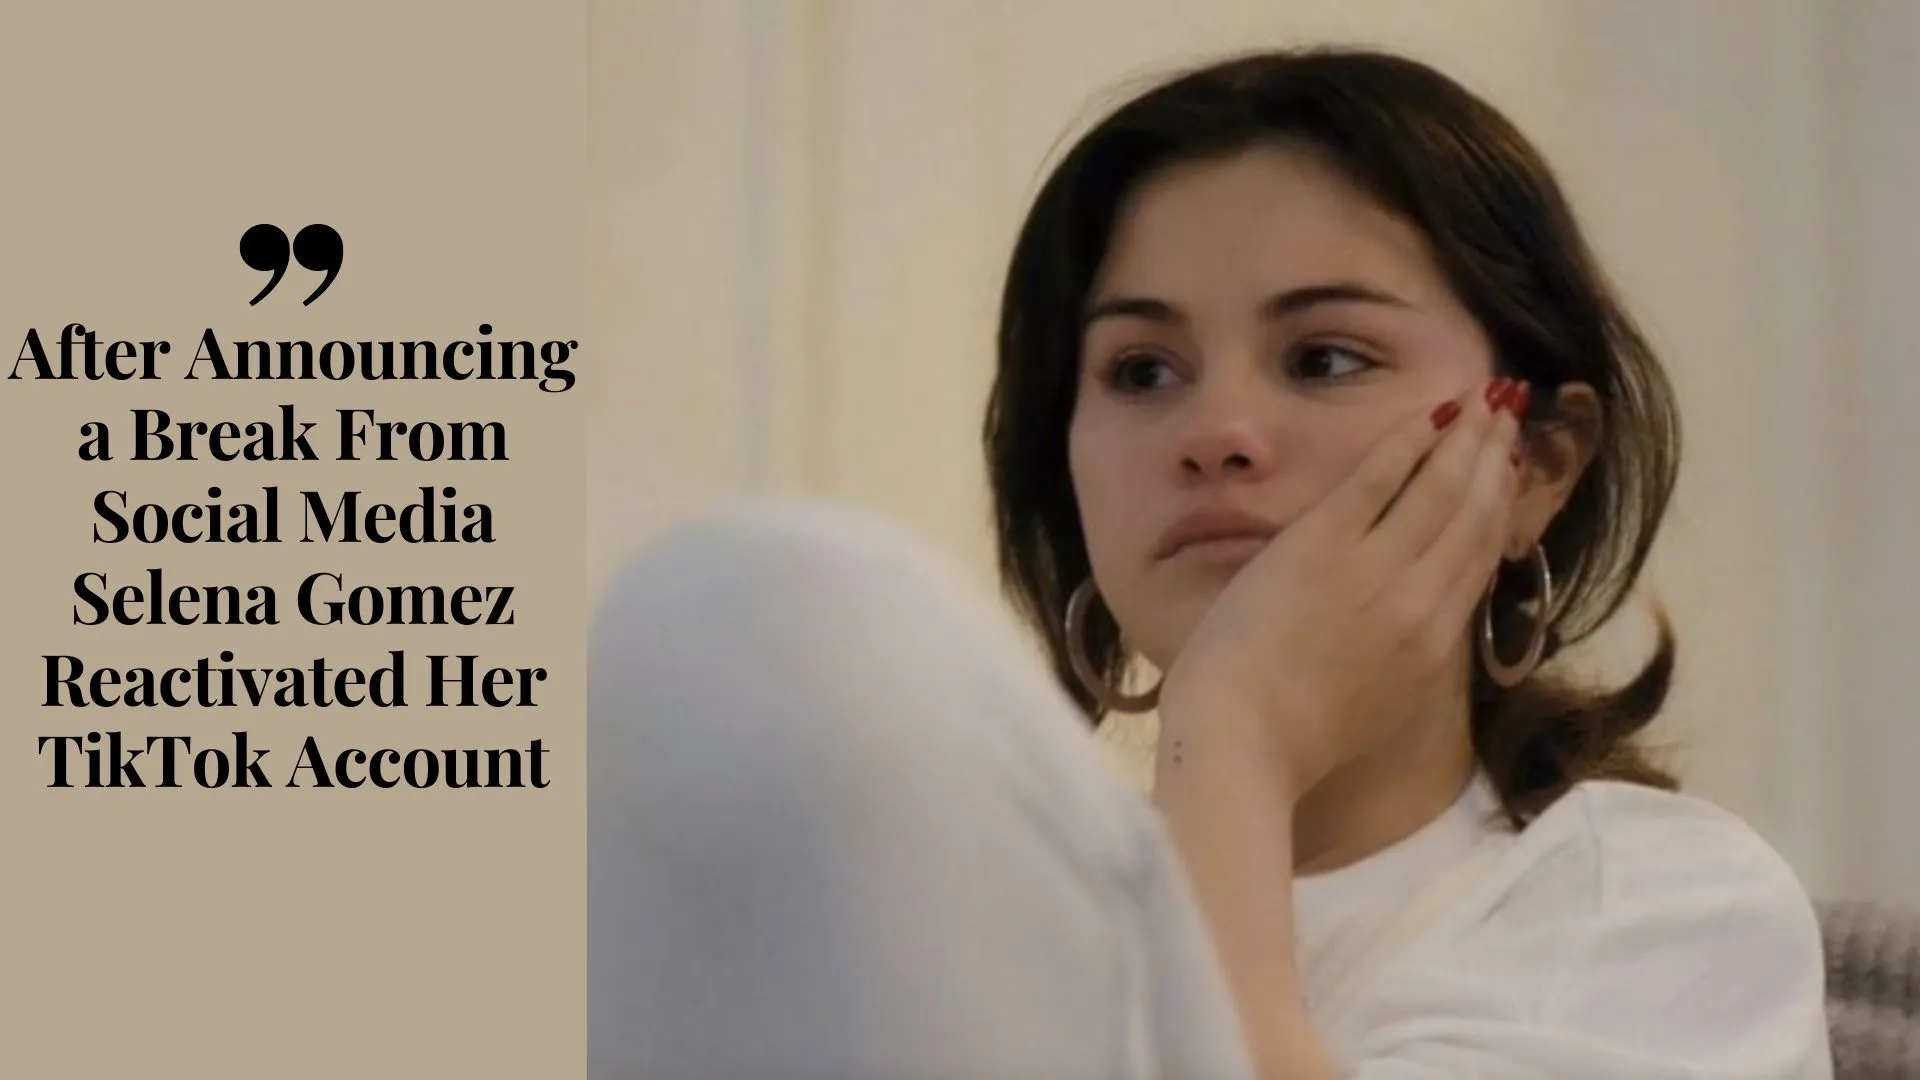 After Announcing a Break From Social Media Selena Gomez Reactivated Her TikTok Account (Image credit: metroworldnews)